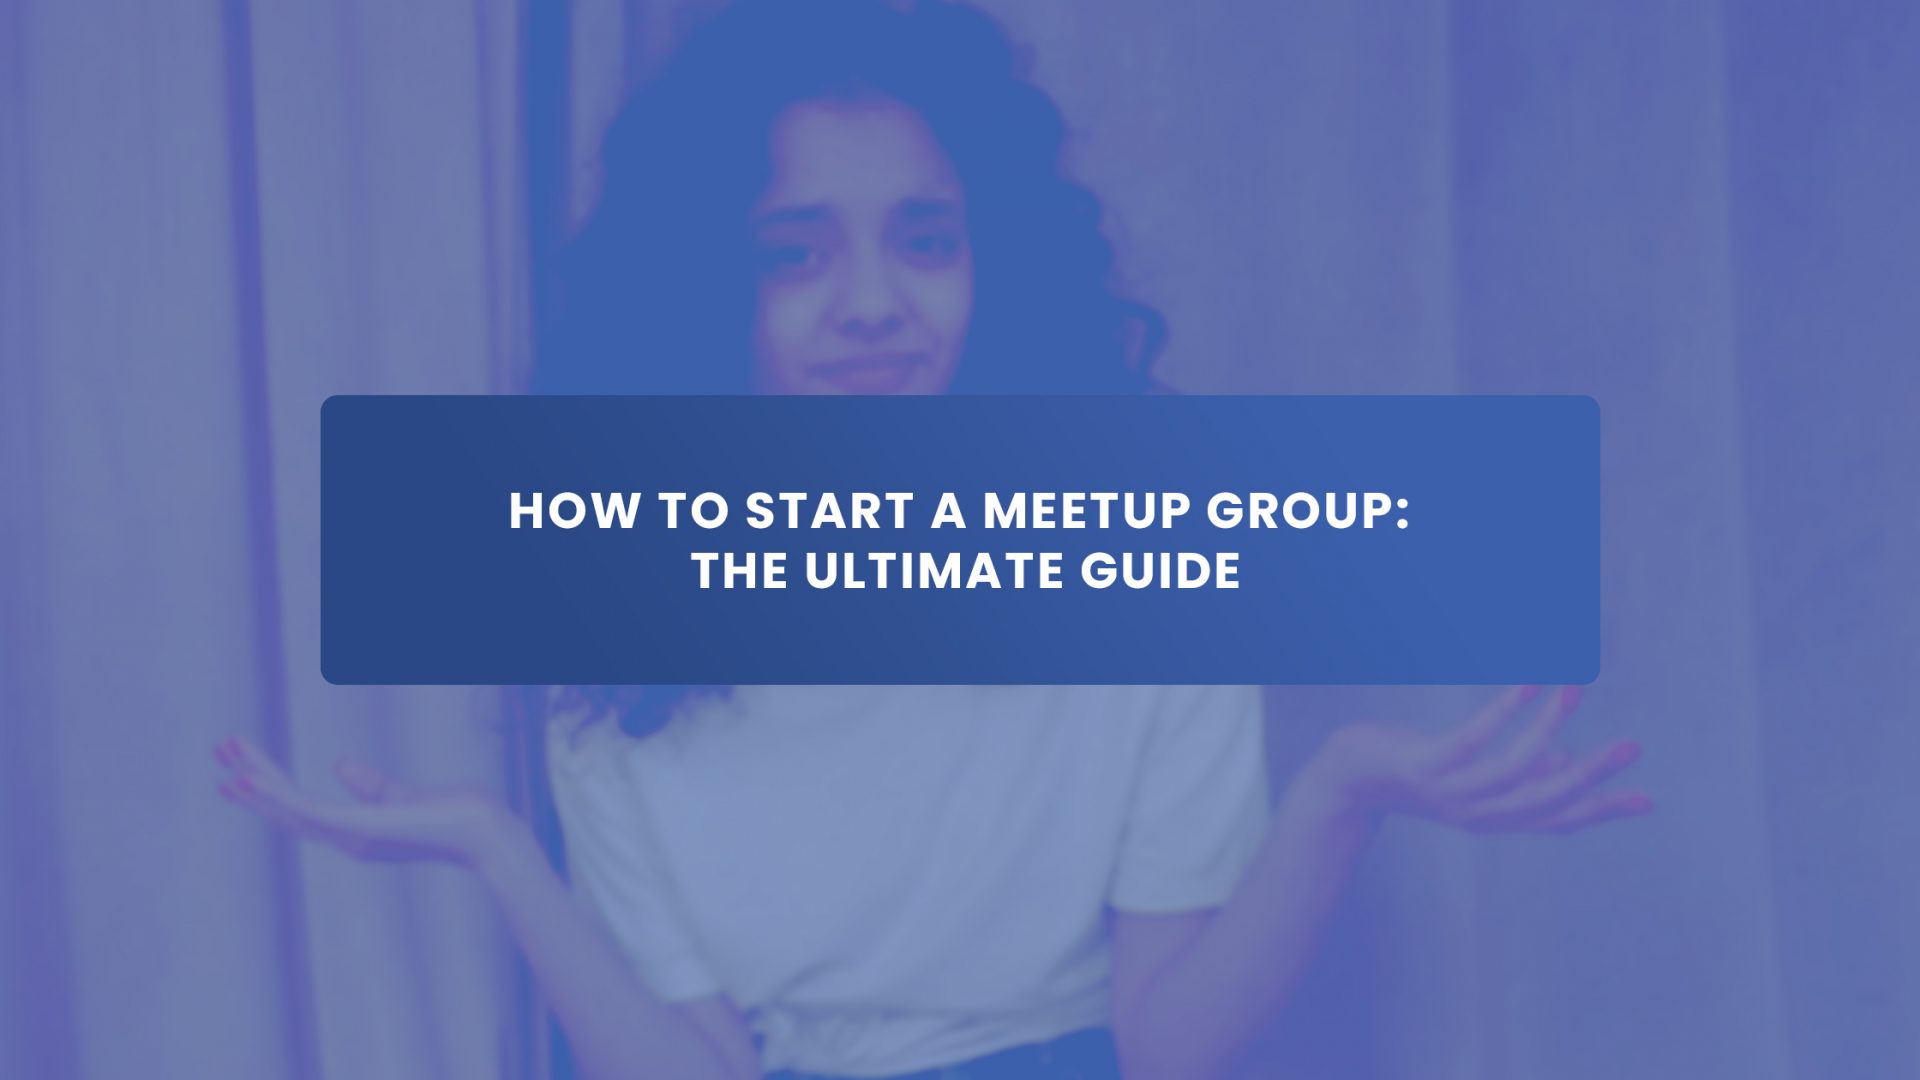 How To Start a Meetup Group - The Ultimate Guide